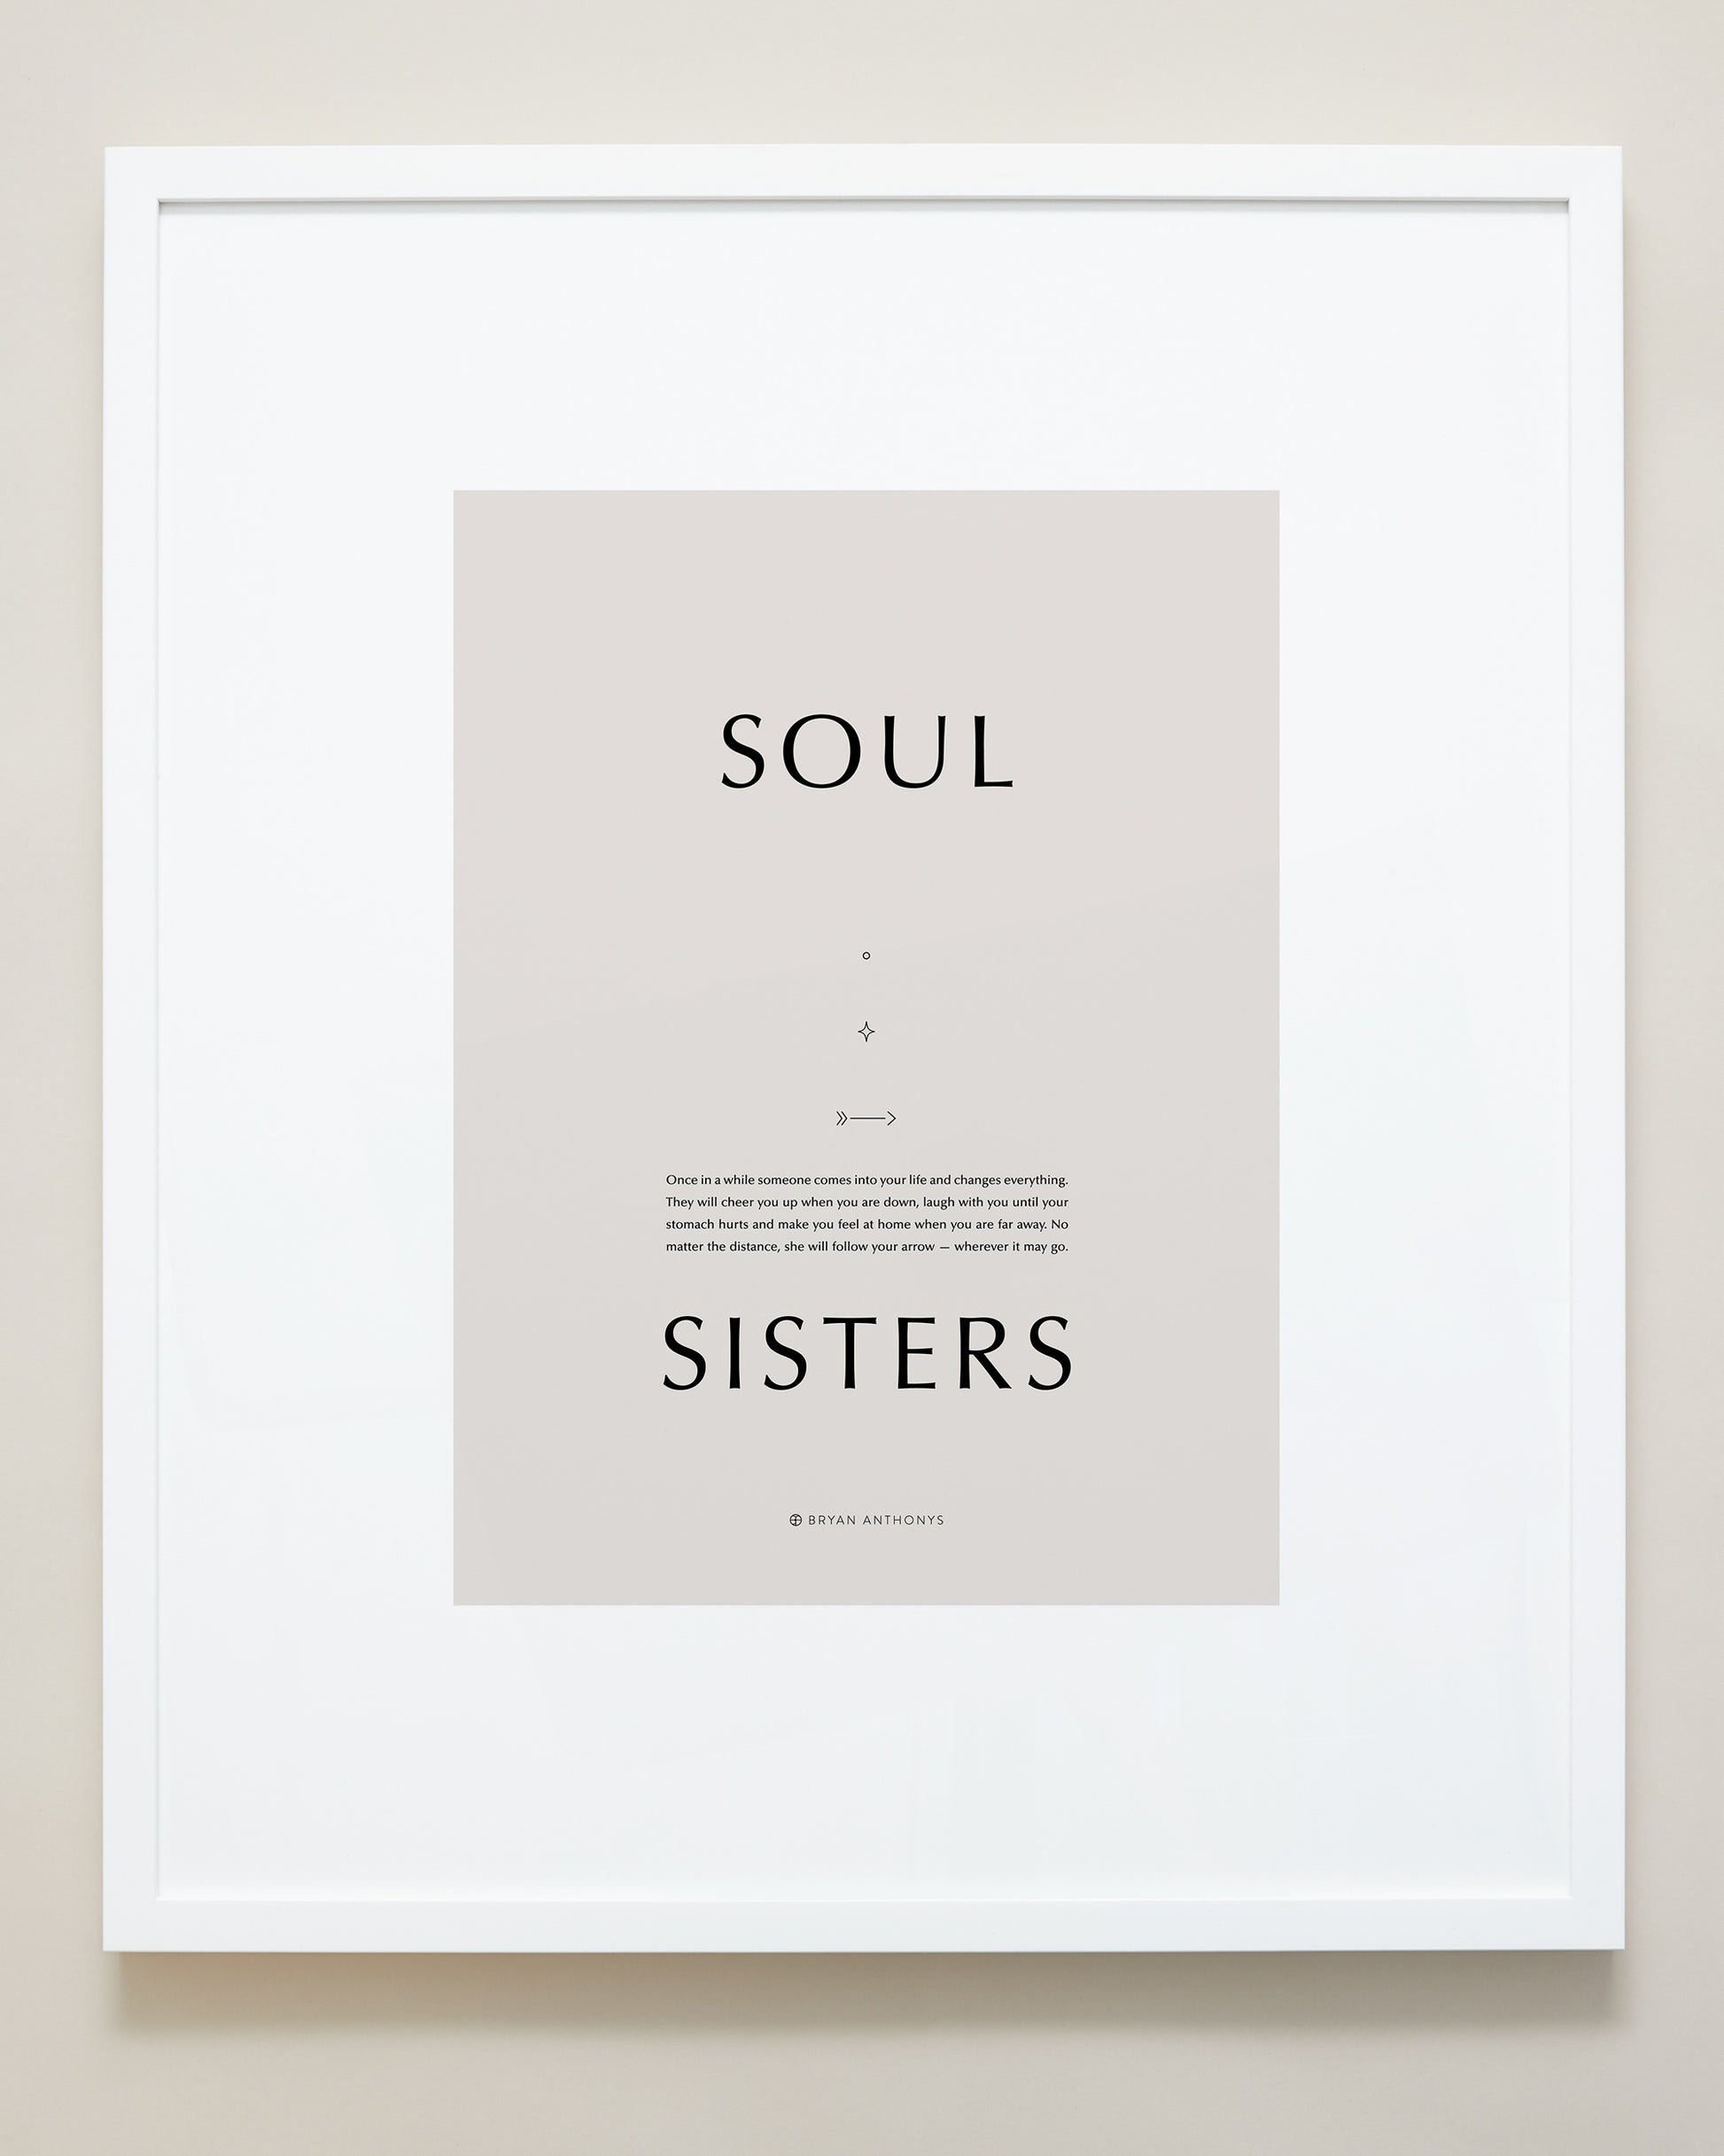 Bryan Anthonys Home Decor Purposeful Prints Soul Sisters Iconic Framed Print Tan Art with White Frame 20x24